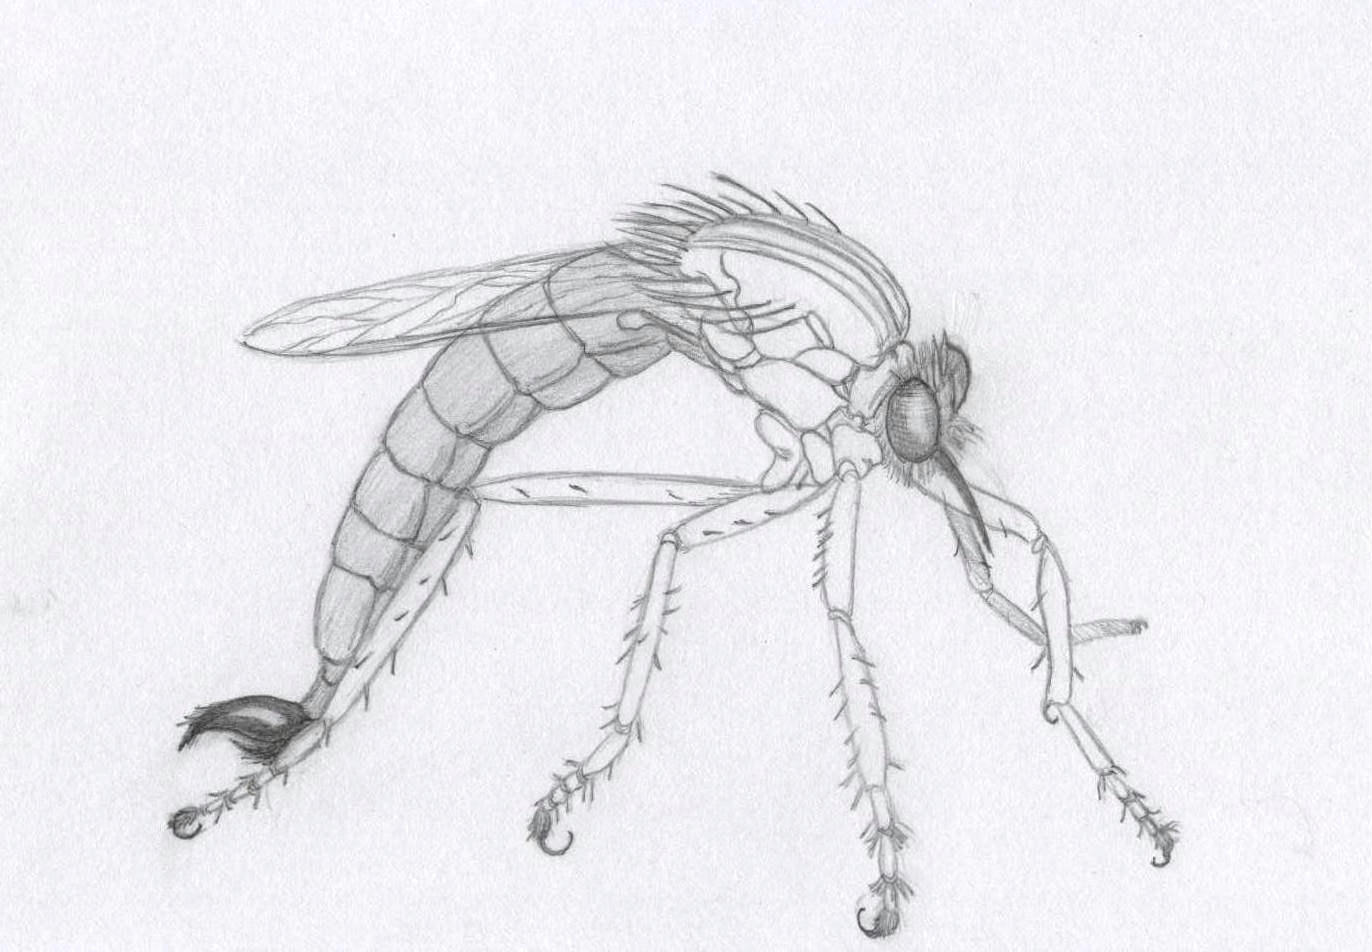 Robber Fly by Ran_The_Hyena